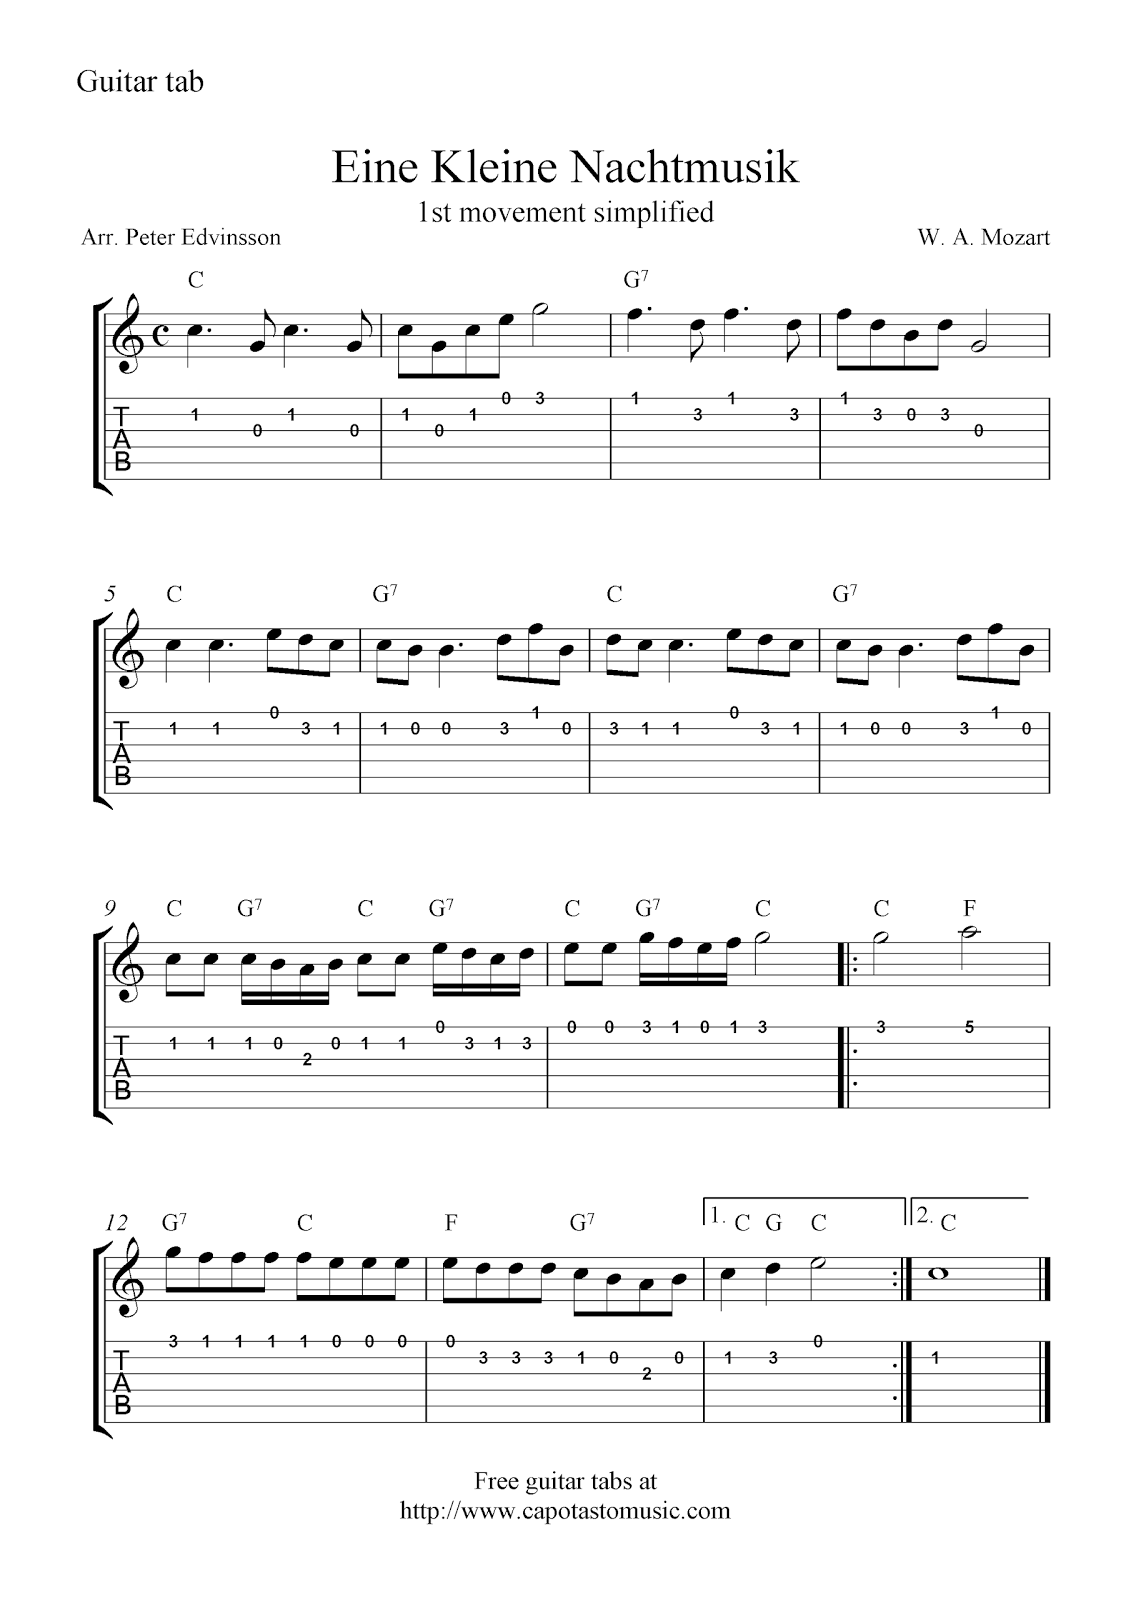 easy-sheet-music-for-beginners-free-guitar-tablature-sheet-music-notes